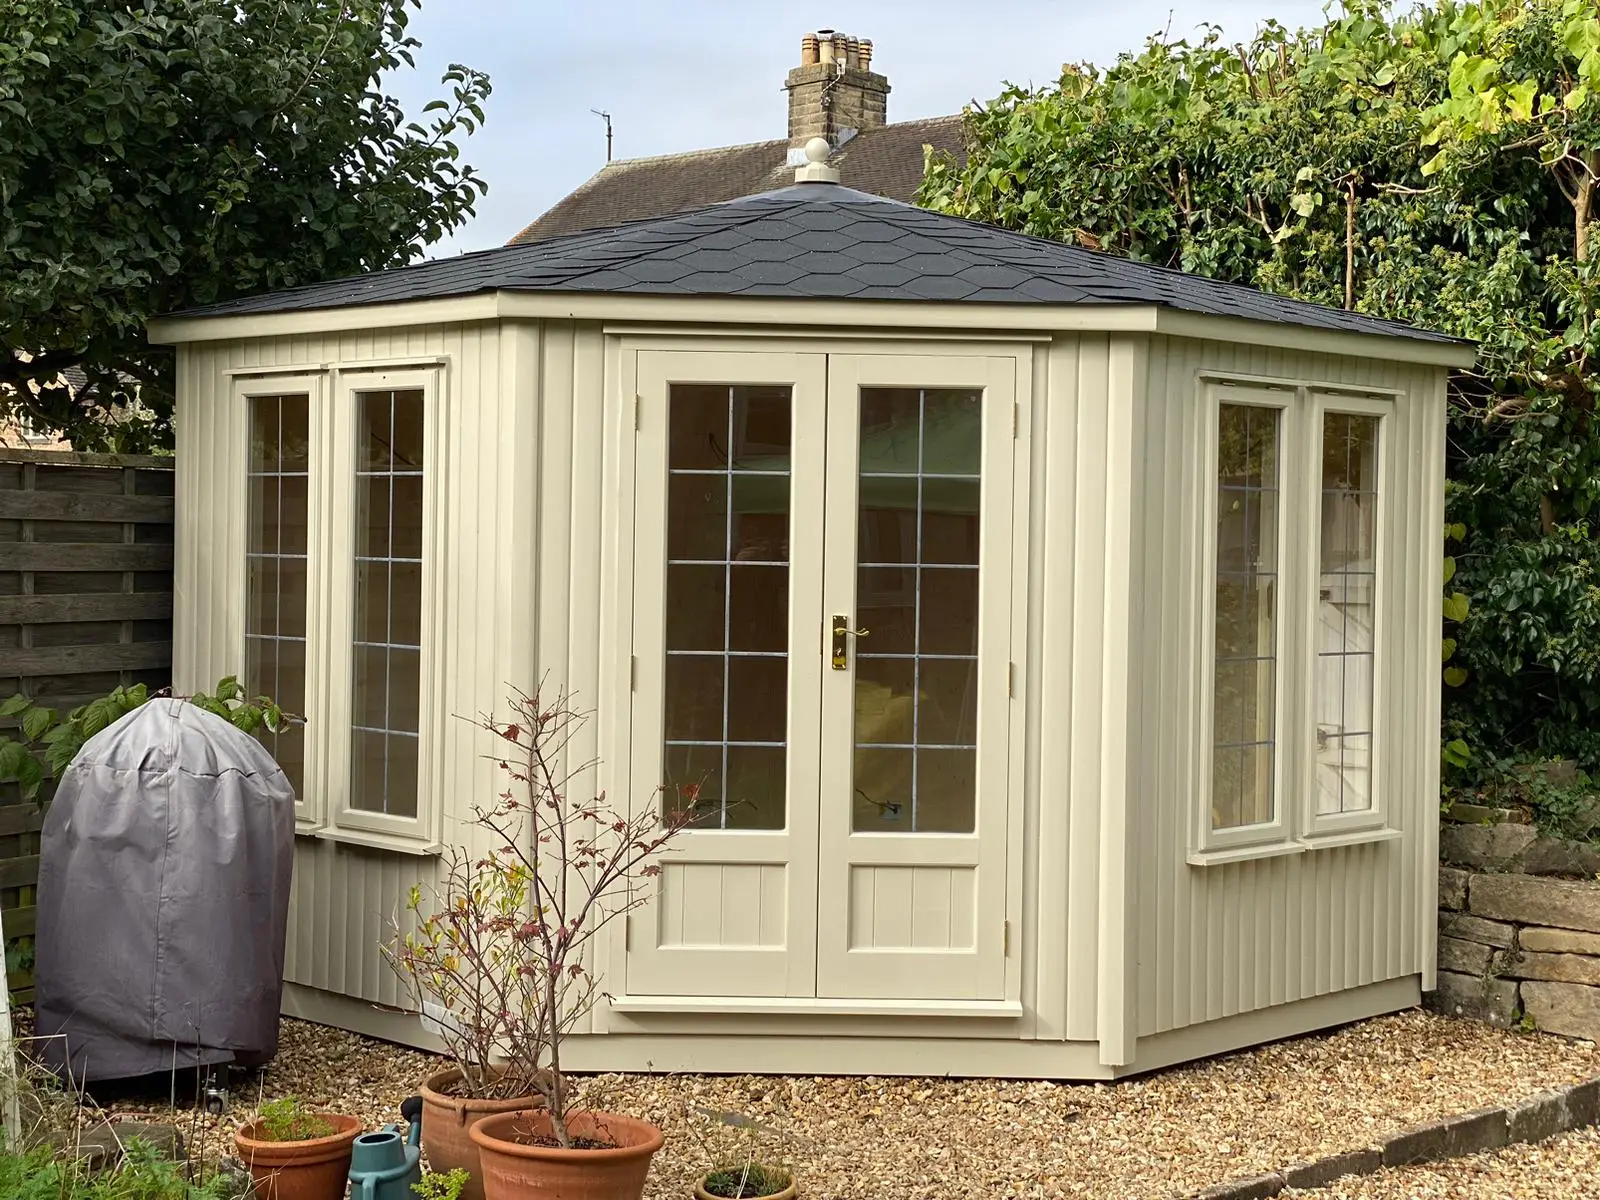 Contemporary Corner Summerhouse with leaded double glazed windows, fully lined and insulated with electrics and painted exterior.